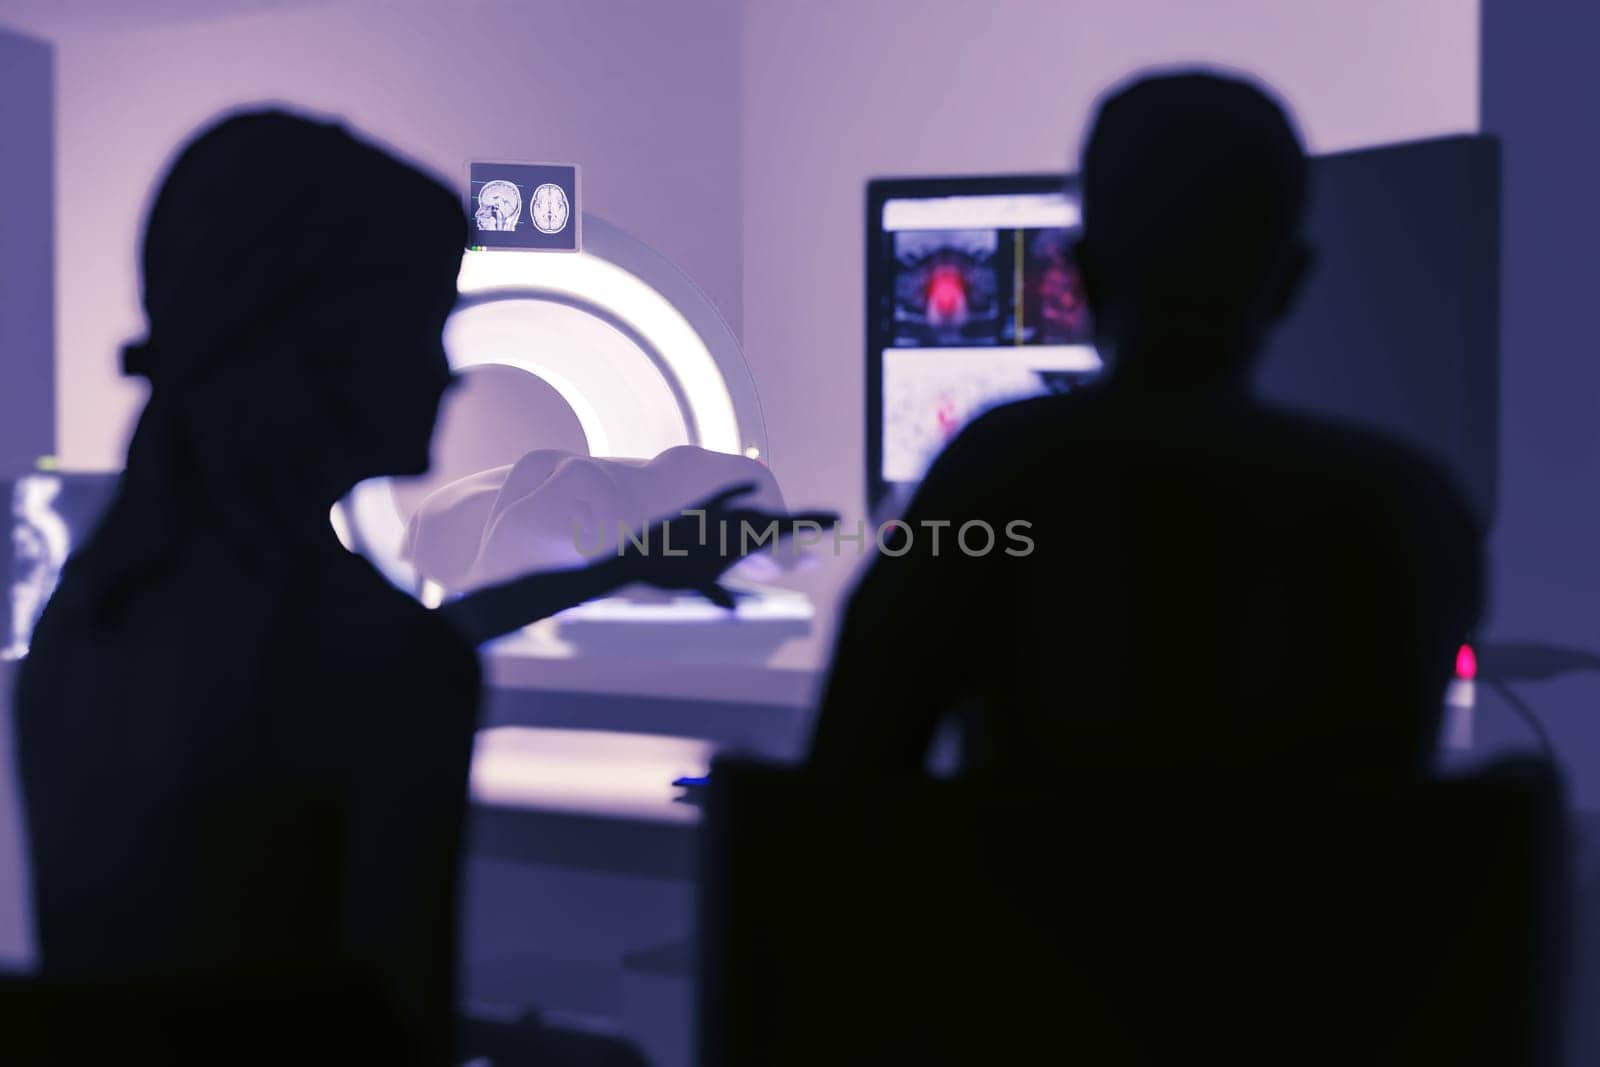 In Control Room Doctor and Radiologist Discuss Diagnosis while Watching Procedure and Monitors Showing Brain Scans Results, In the Background Patient Undergoes MRI or CT Scan Procedure.3D rendering . by samunella